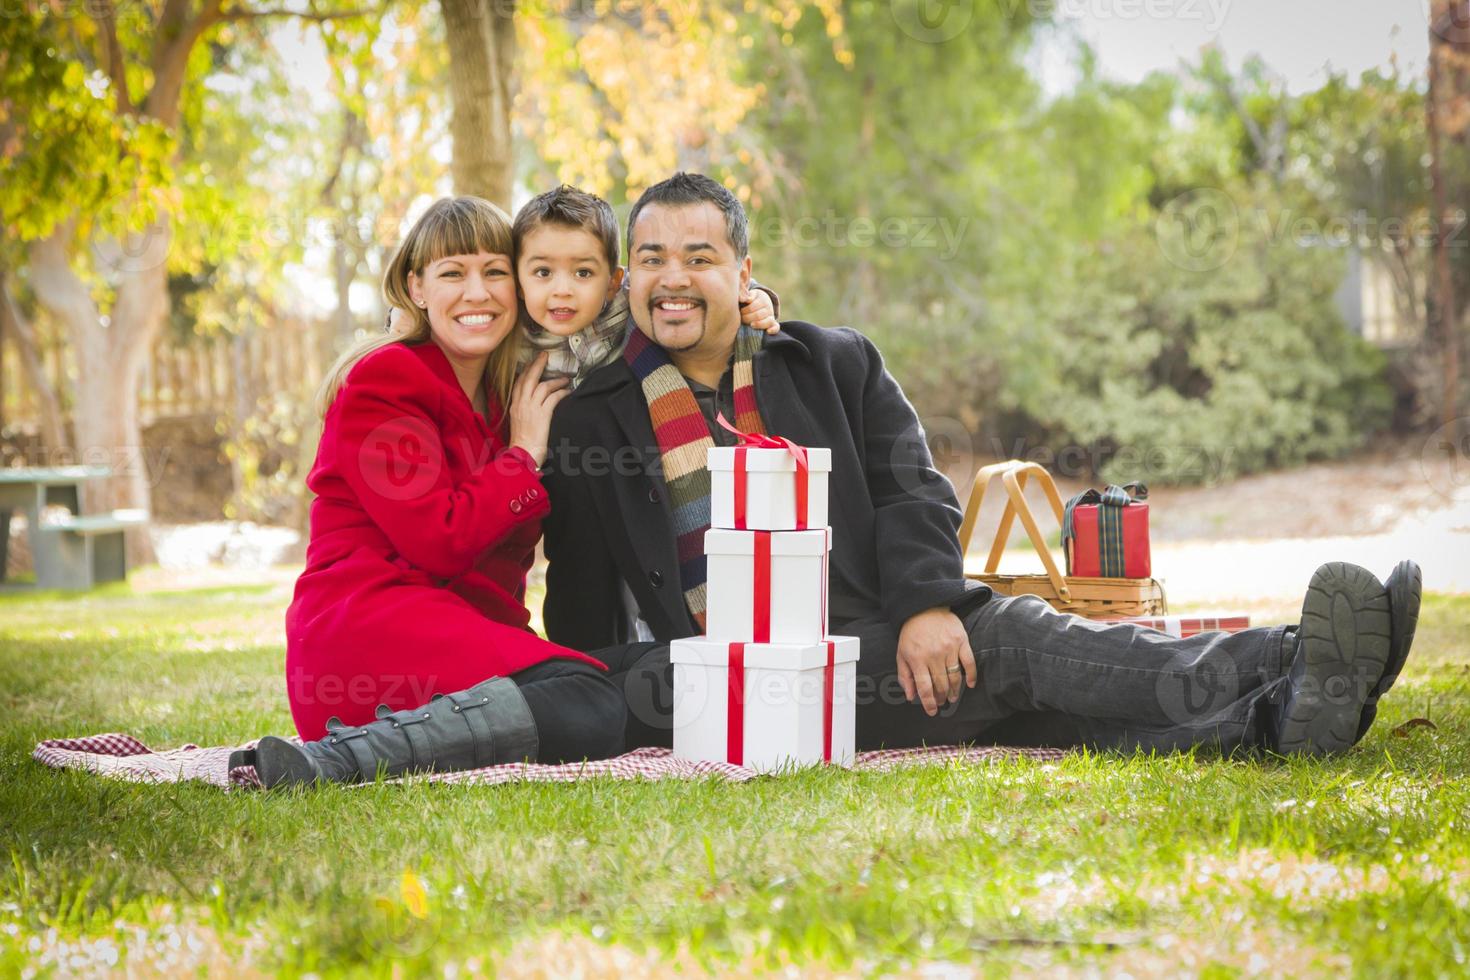 Mixed Race Family Enjoying Christmas Gifts in the Park Together photo